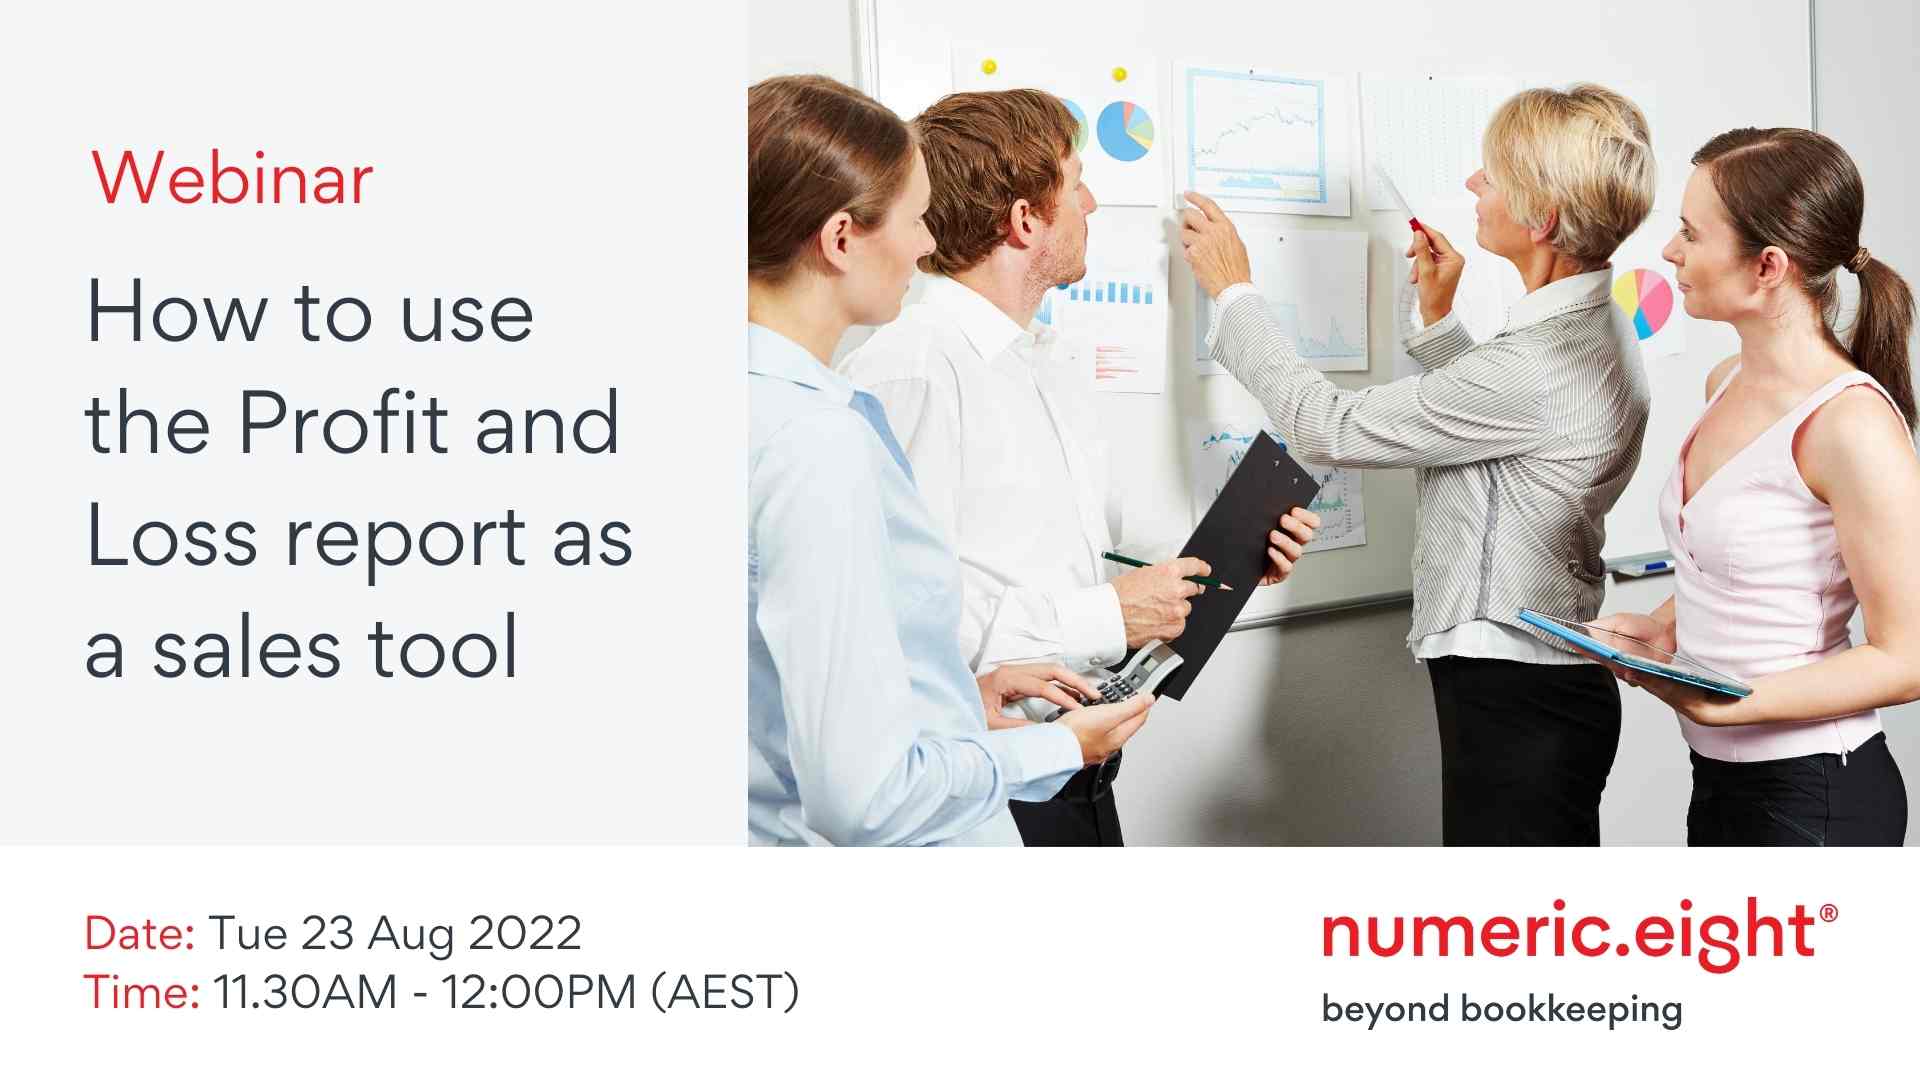 Webinar How to use the Profit and Loss report as a sales tool 23 Aug 2022